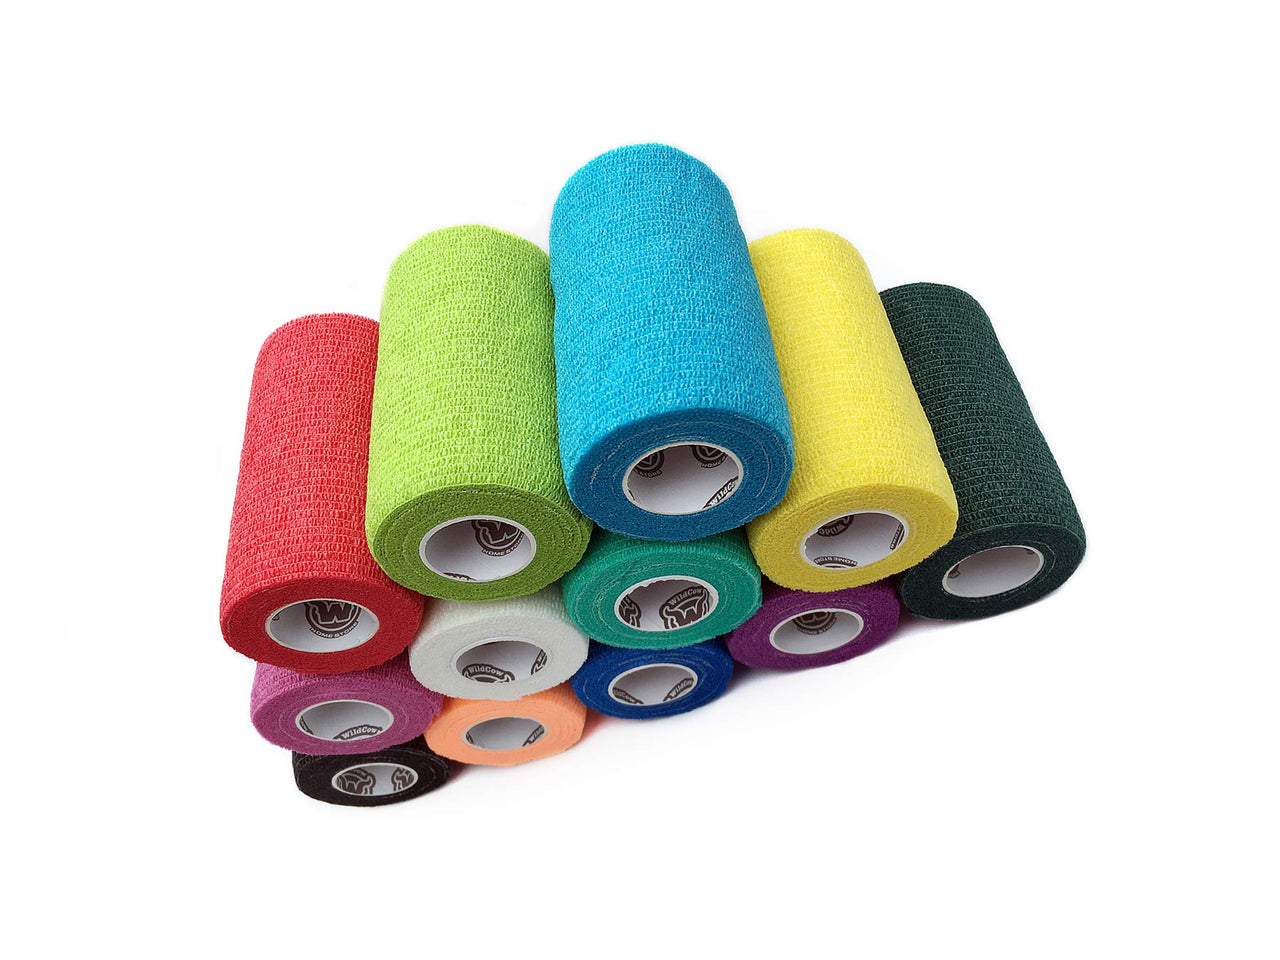 6 Roll Wrap Tape Bulk (Assorted and Camouflage Colors Random) Vet